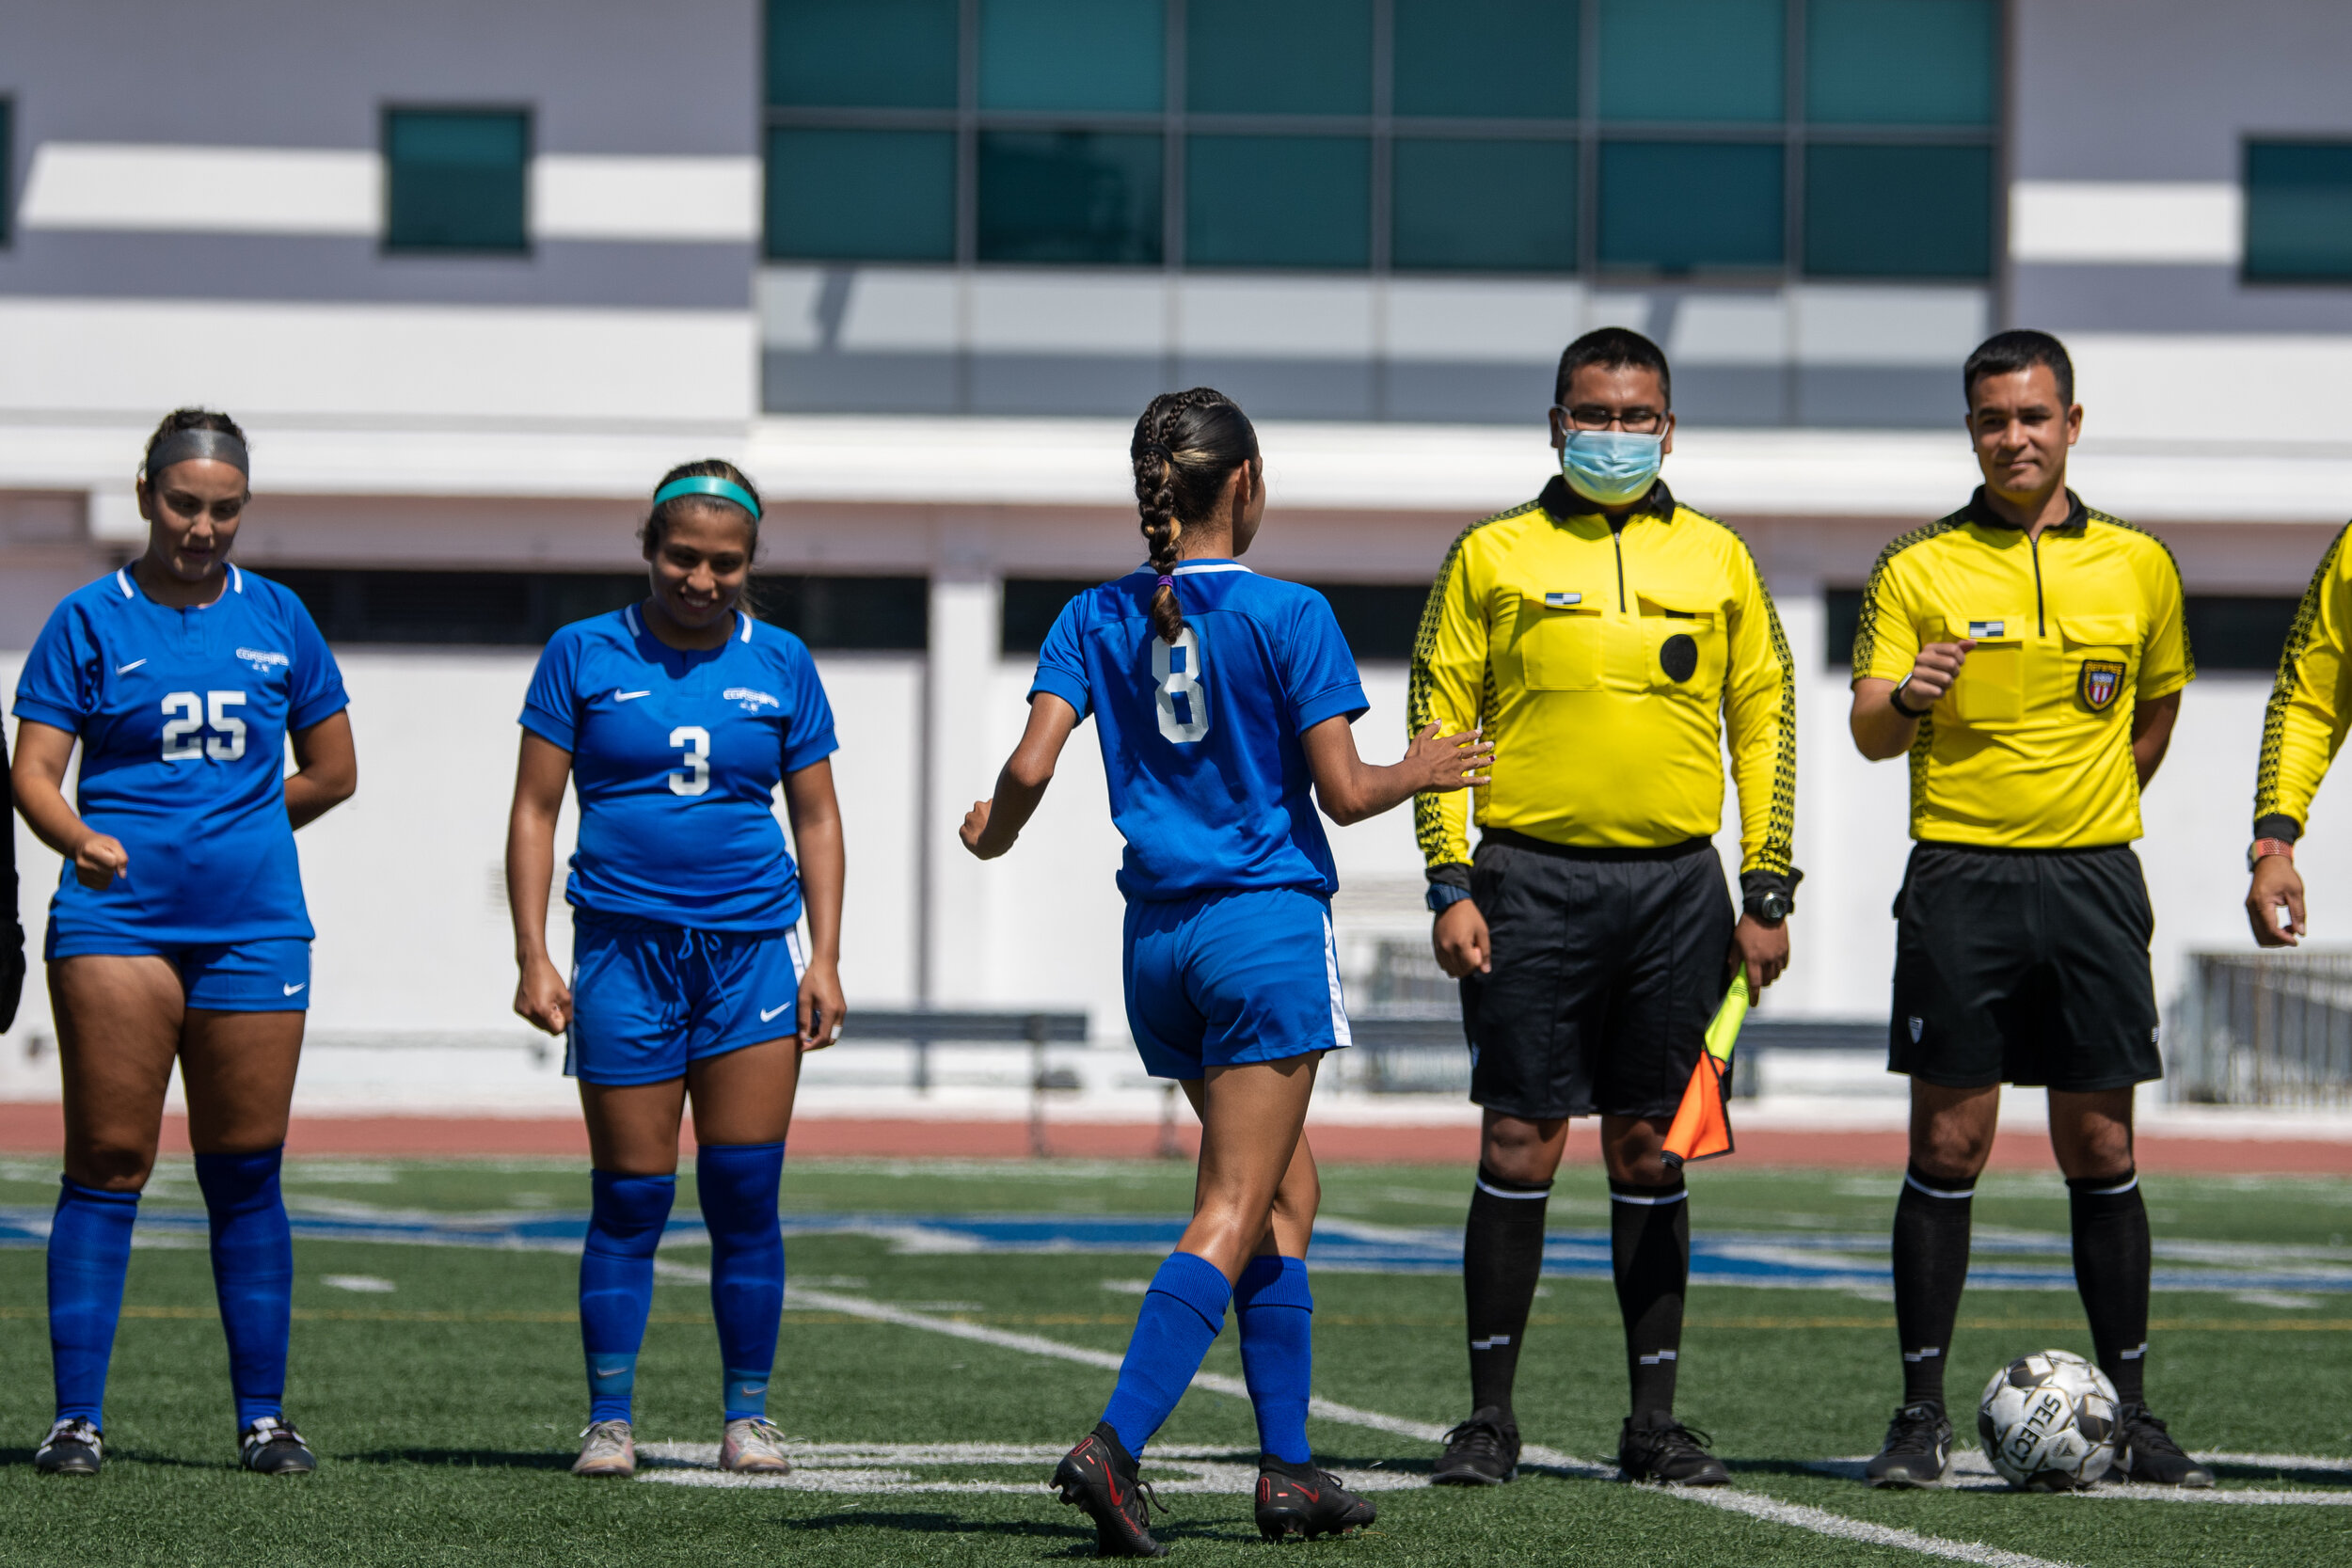  Cassie Velasquez and Monica Moya (L-R) are approached by Ashley Silva (center) of the Santa Monica College woman's soccer team at the start of their match against Chaffey College on the Santa Monica College Corsair Field in Santa Monica, Calif. on S